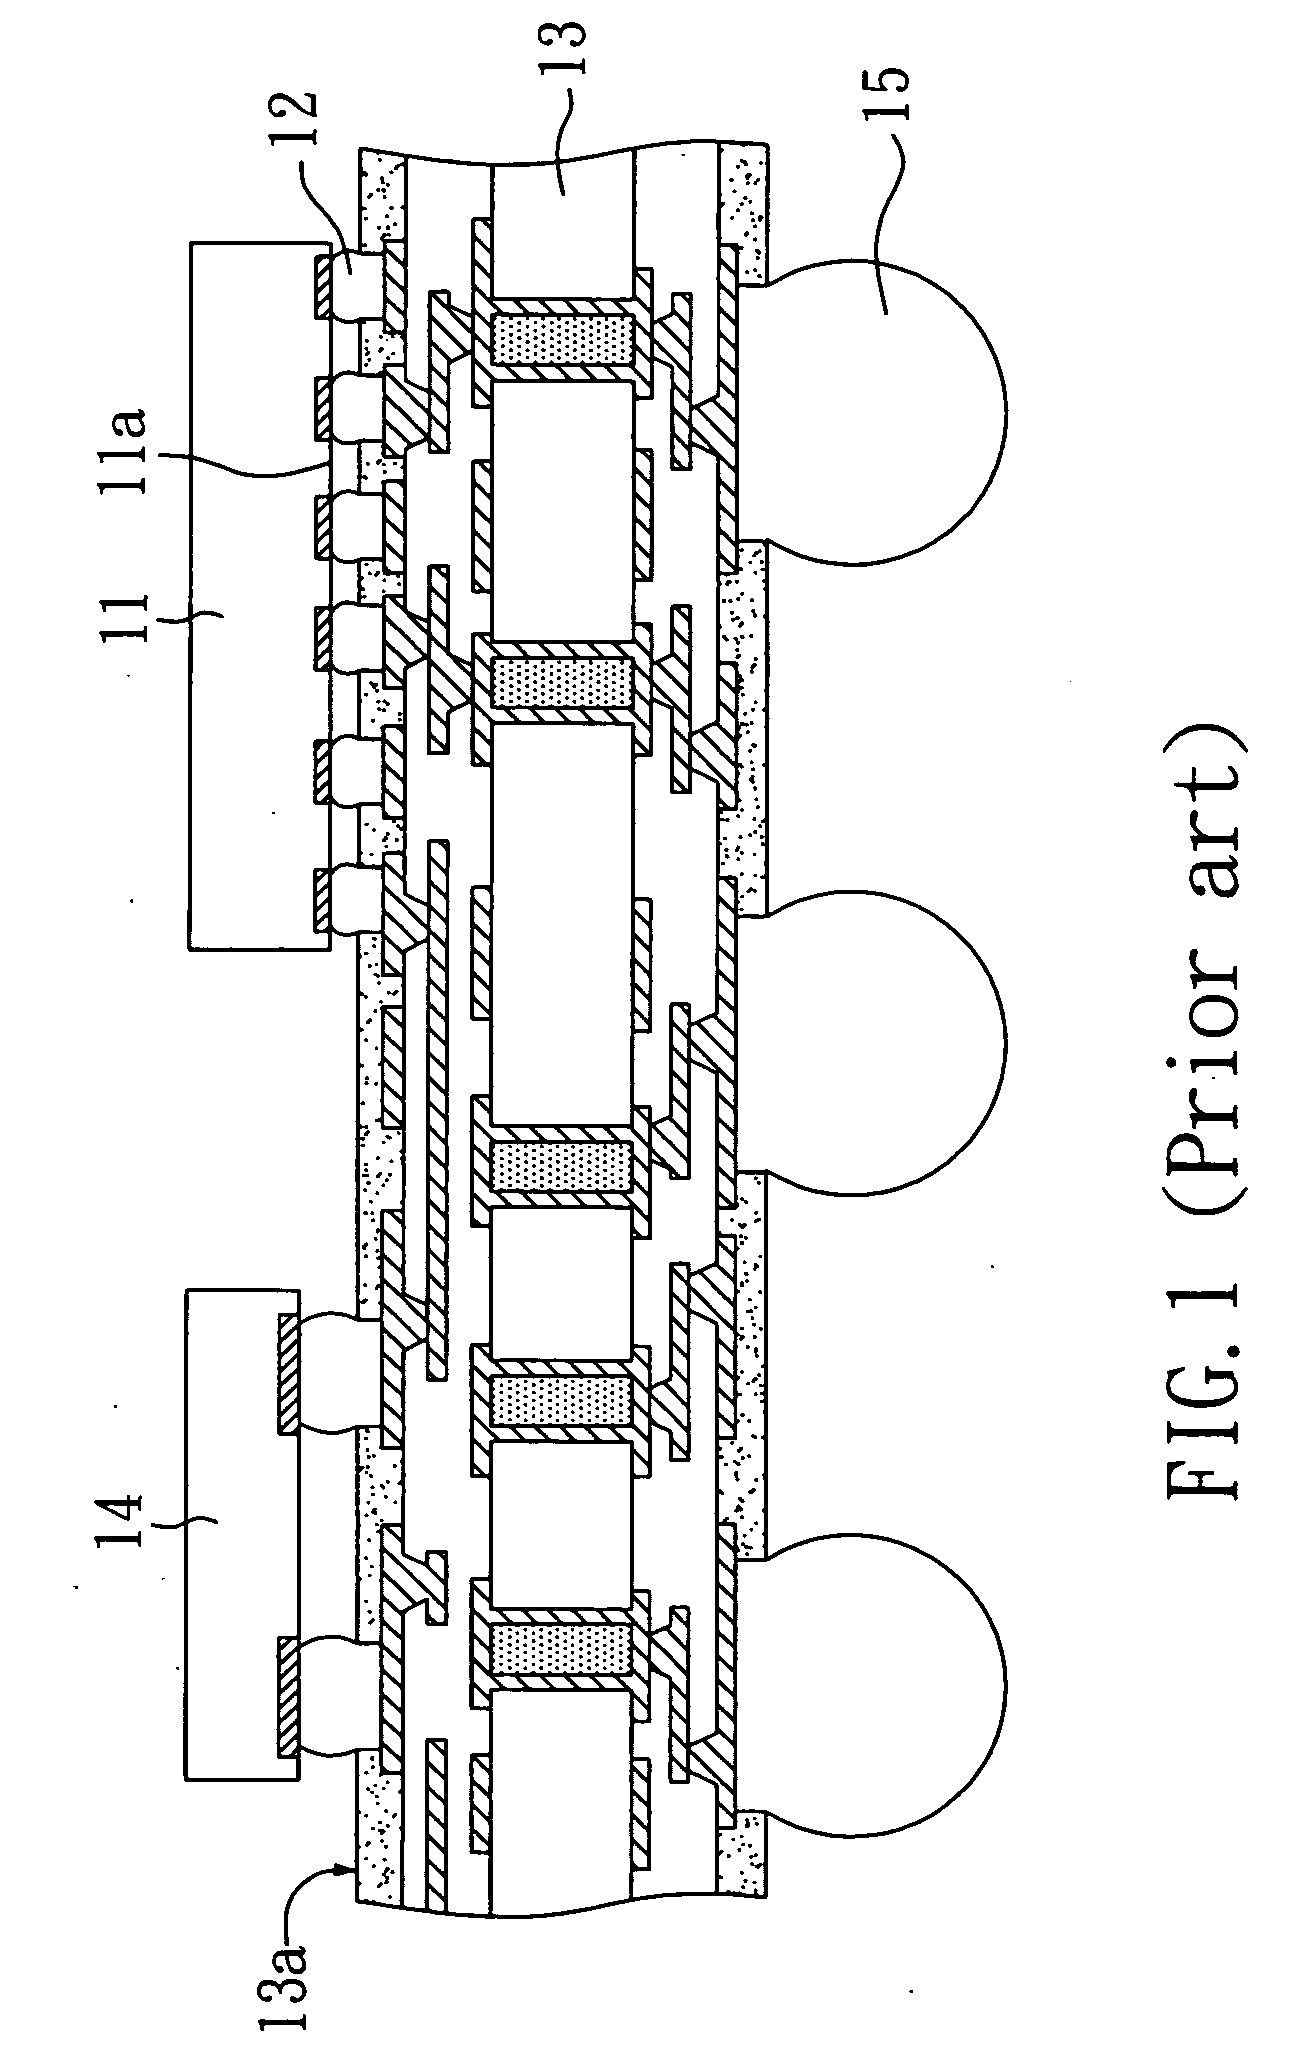 Packaging substrate structure with electronic component embedded therein and method for manufacture of the same